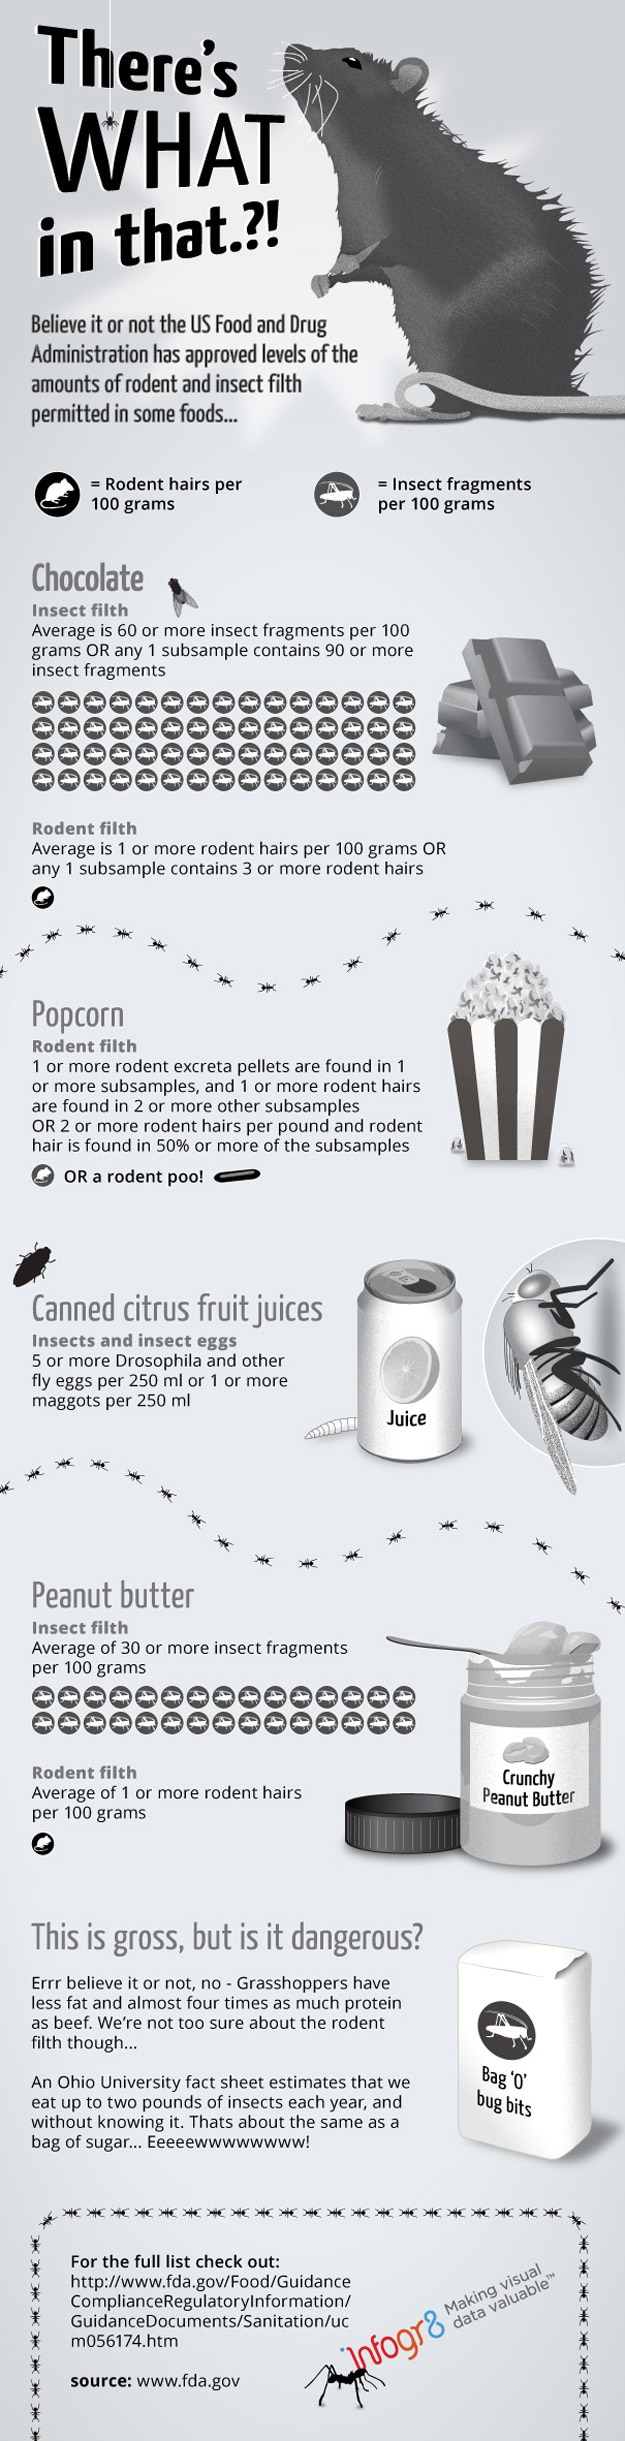 Rodent & Insect Filth: What Is Really In Food [Infographic]